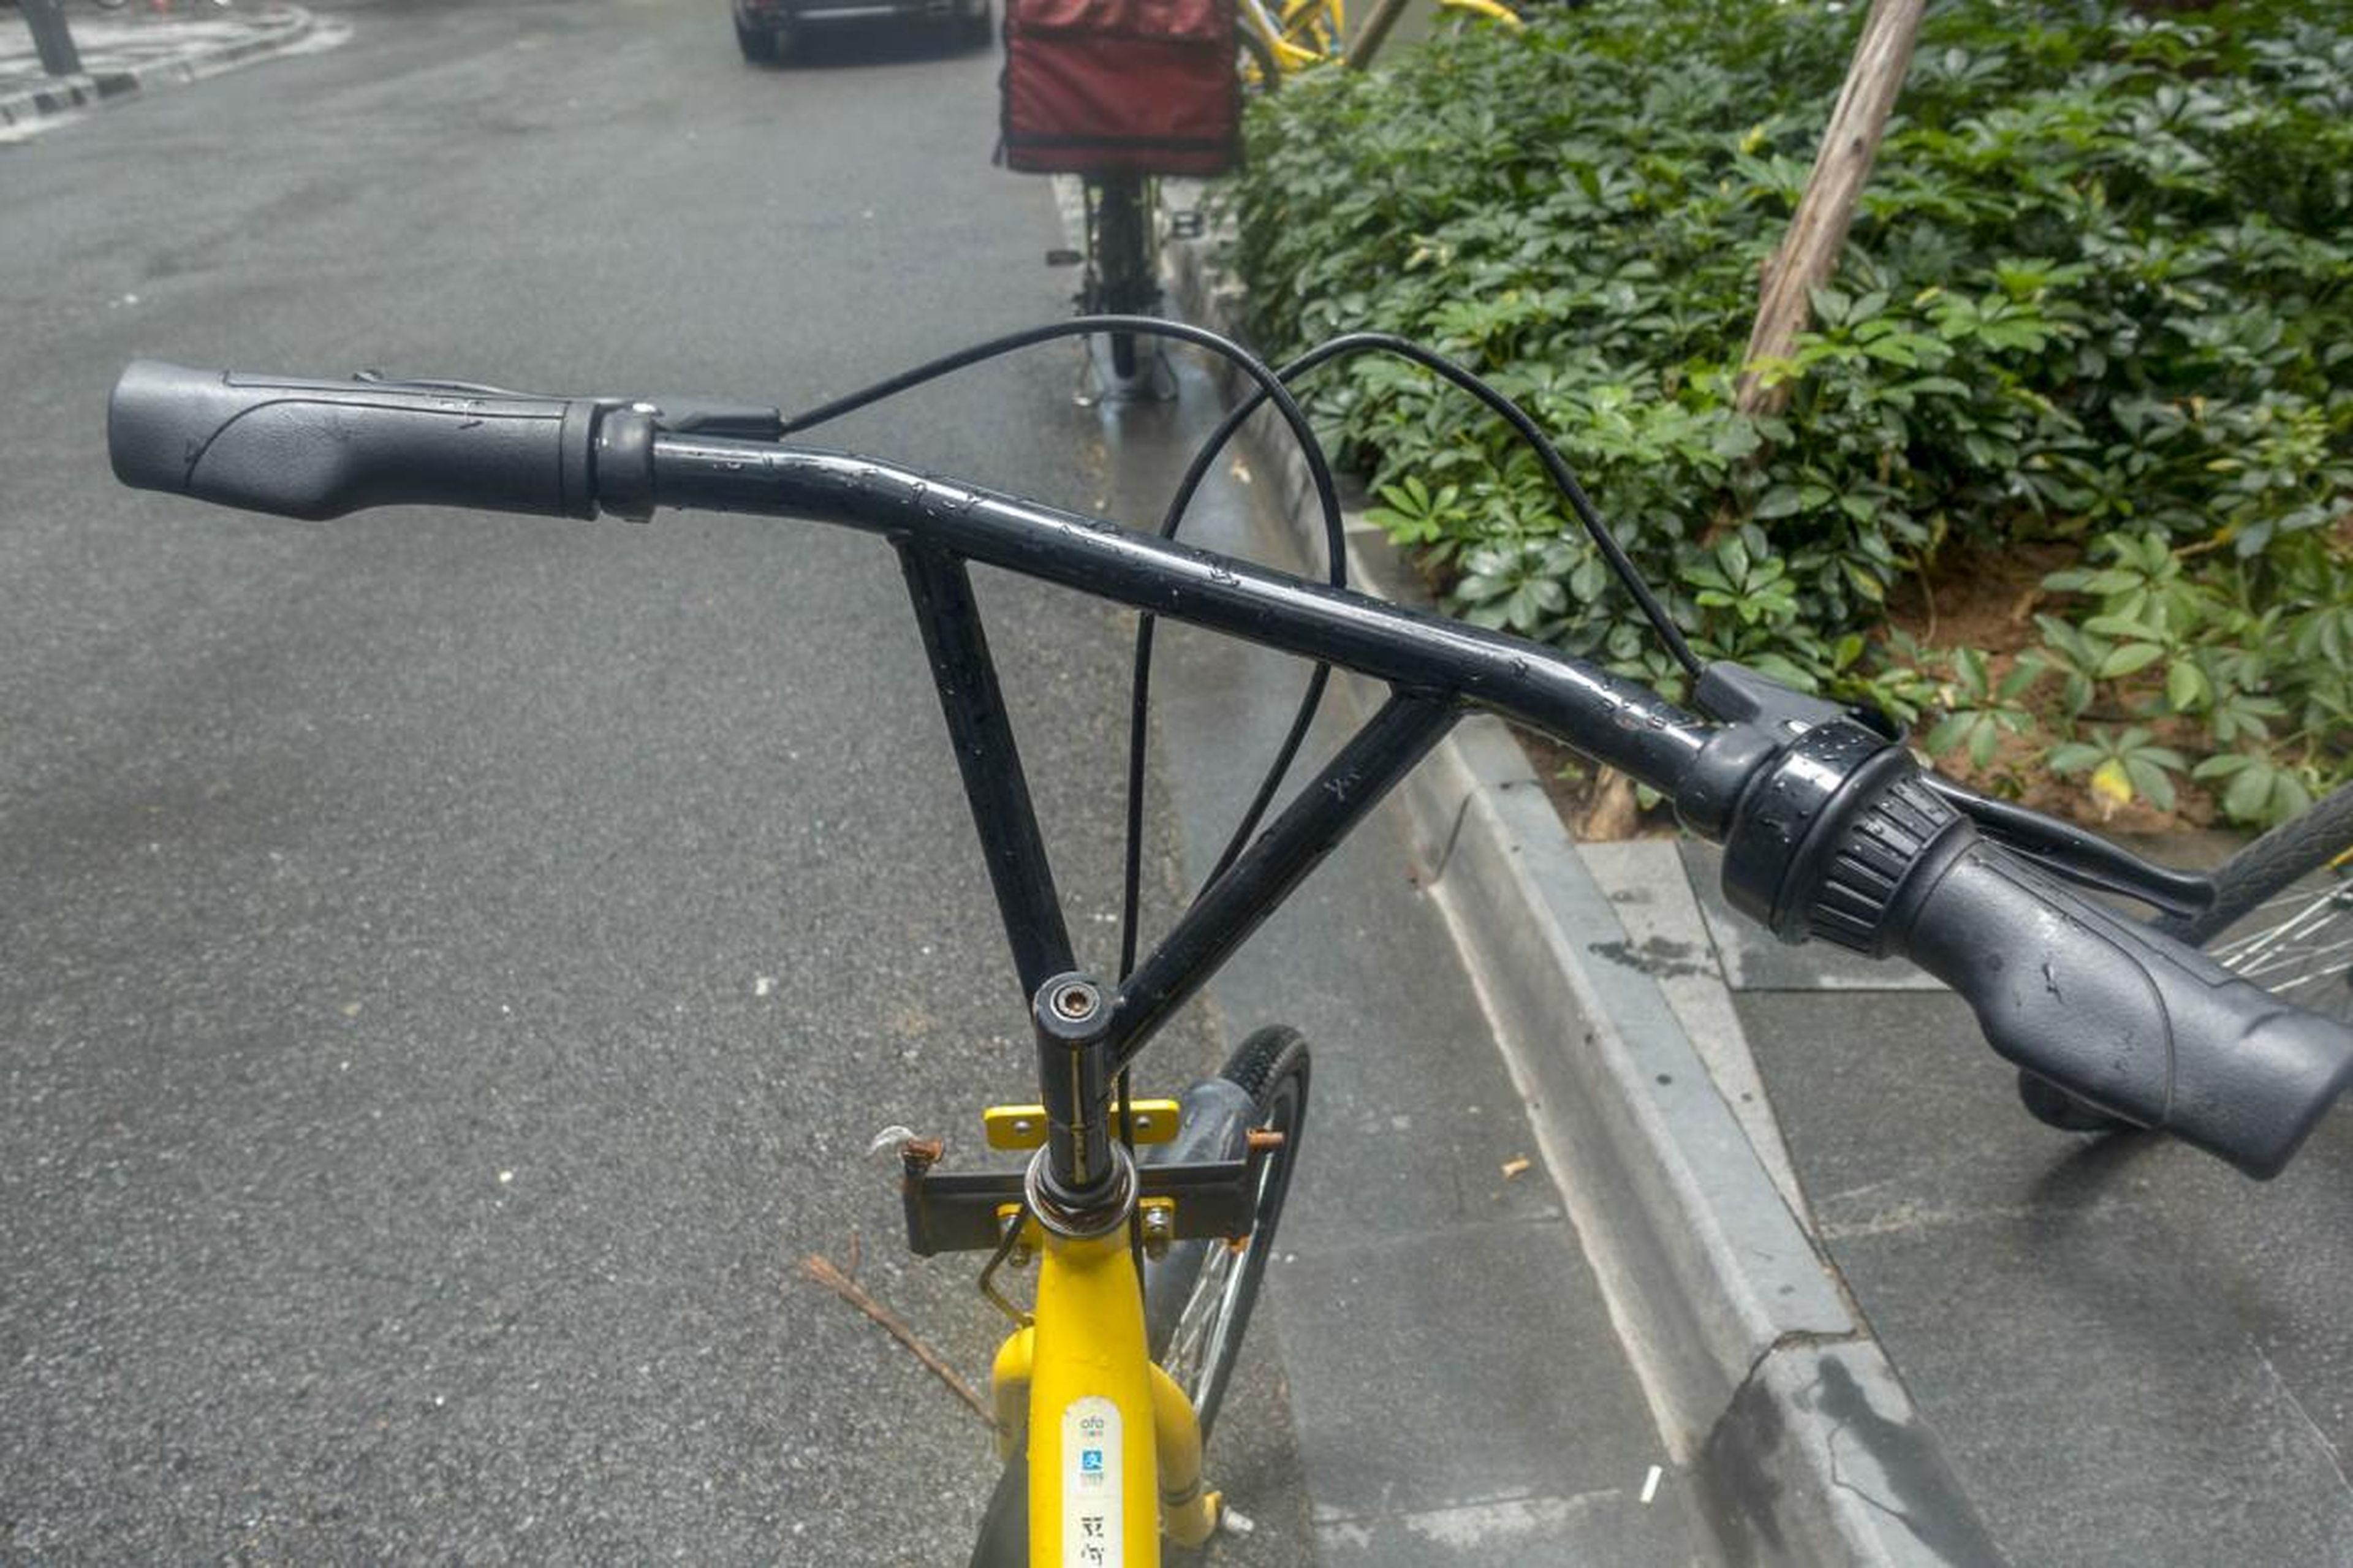 While the bikes were definitely cheap and convenient, they were pretty terrible to ride. It didn't matter if I was using an Ofo or a Mobike. In most cases, I found the bikes to be flimsy, rusted out, with loose handlebars, or a